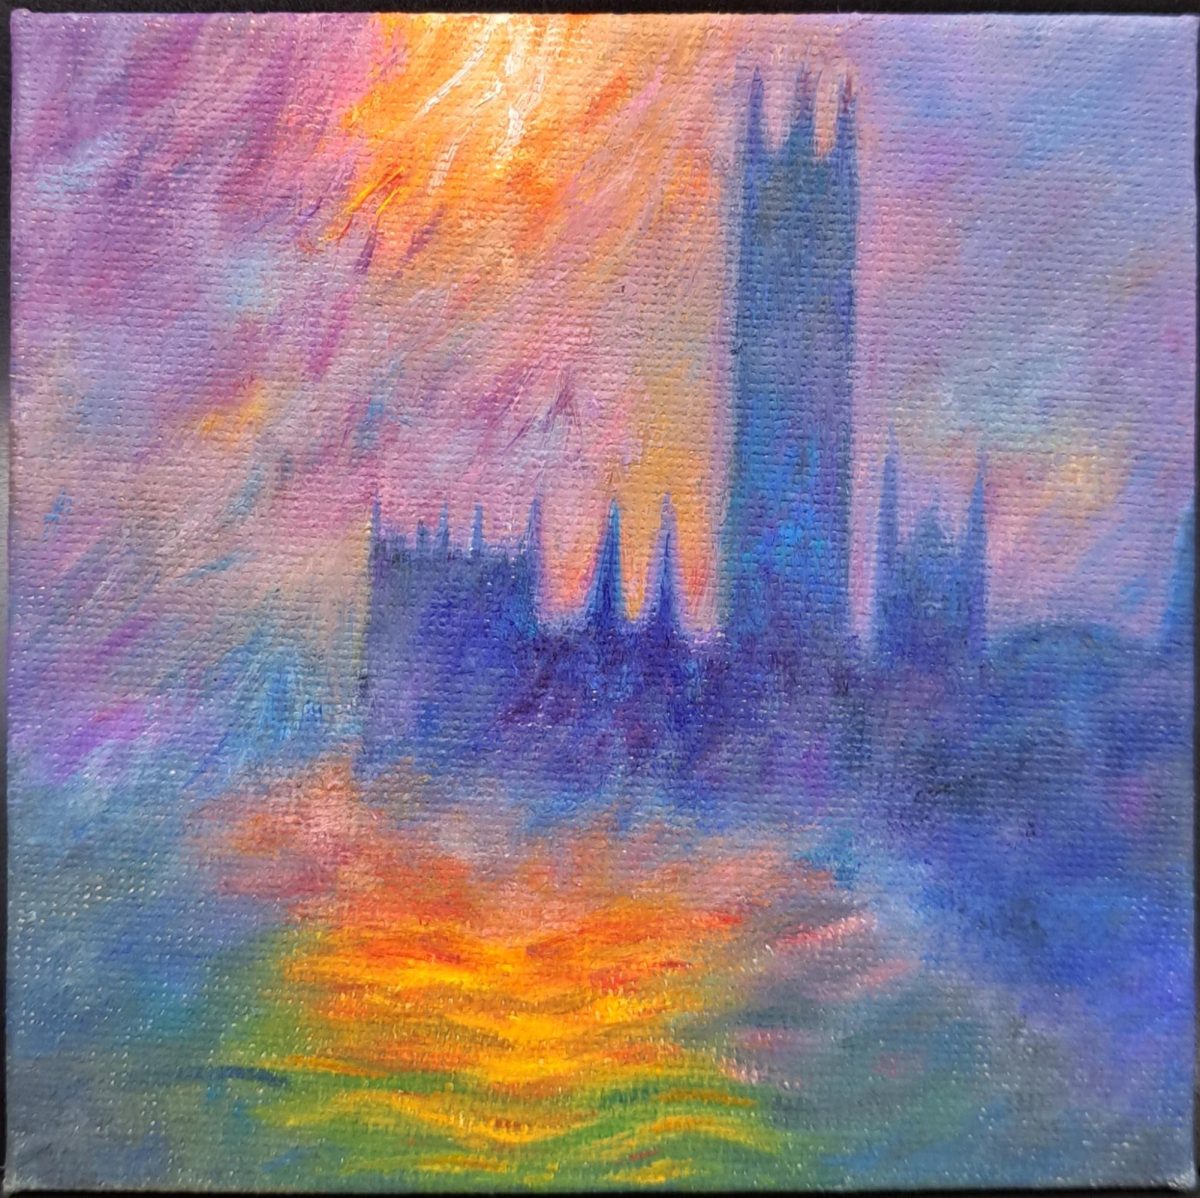 Study of Monet’s “The Houses of Parliament, Sunset”